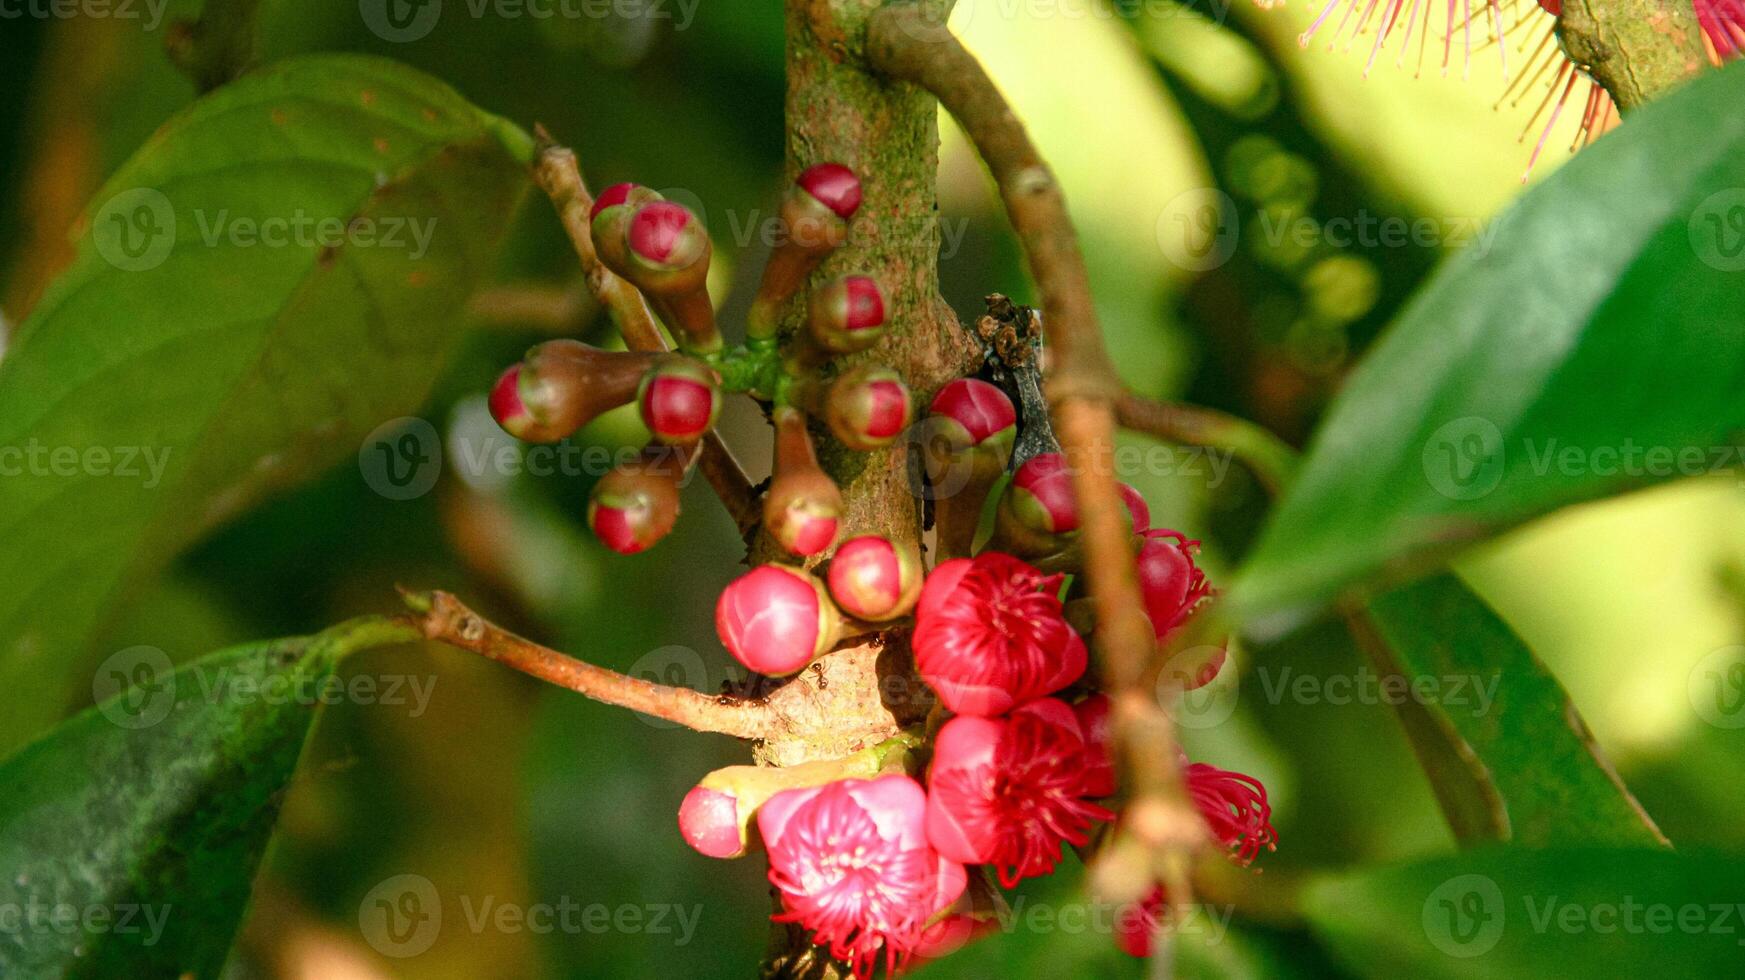 Flowers from the ovary of the Jamaican water guava which are ready to be pollinated photo